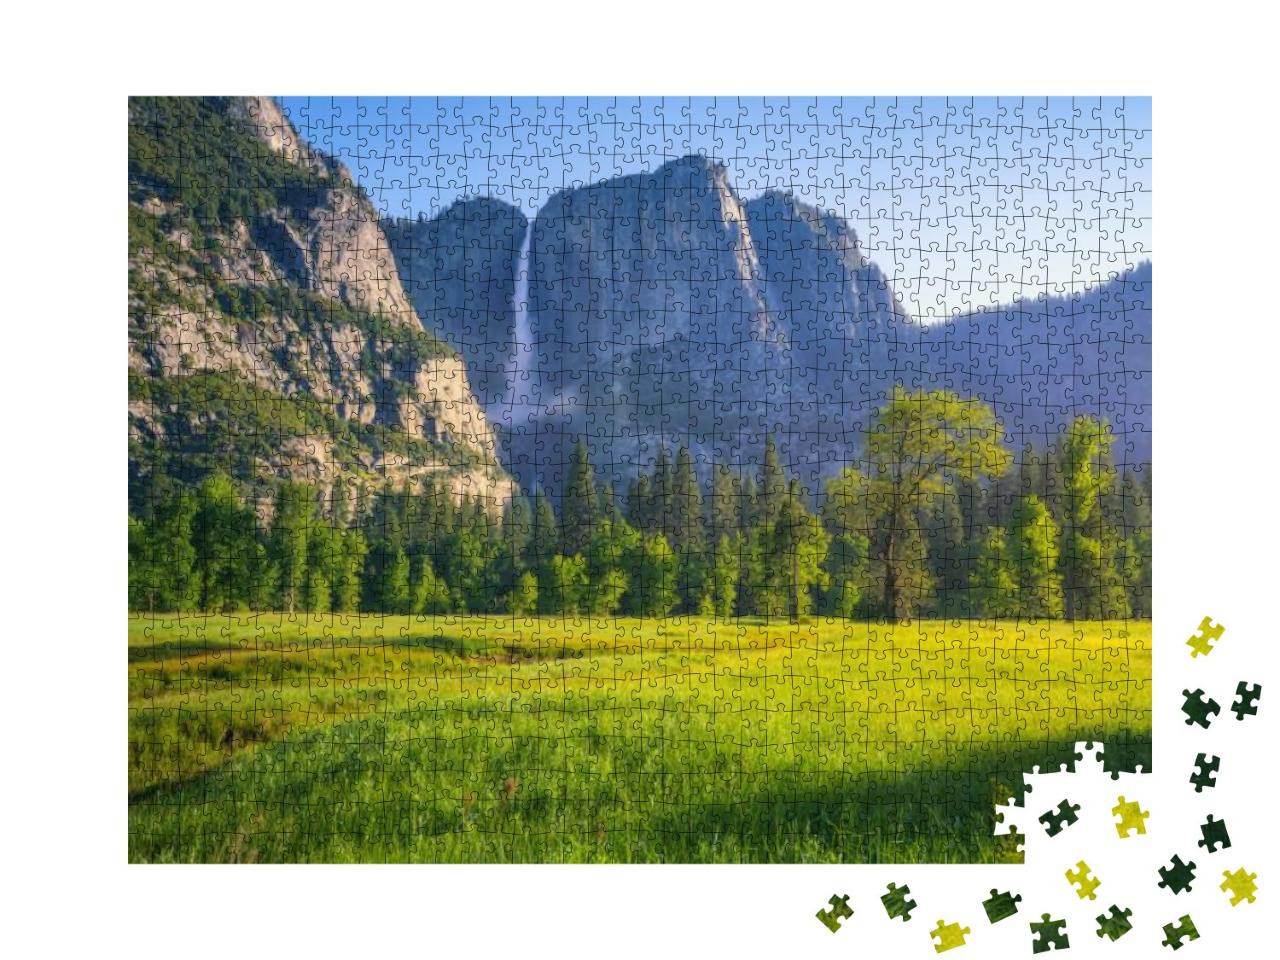 Yosemite Falls from Yosemite Valley, California in the US... Jigsaw Puzzle with 1000 pieces